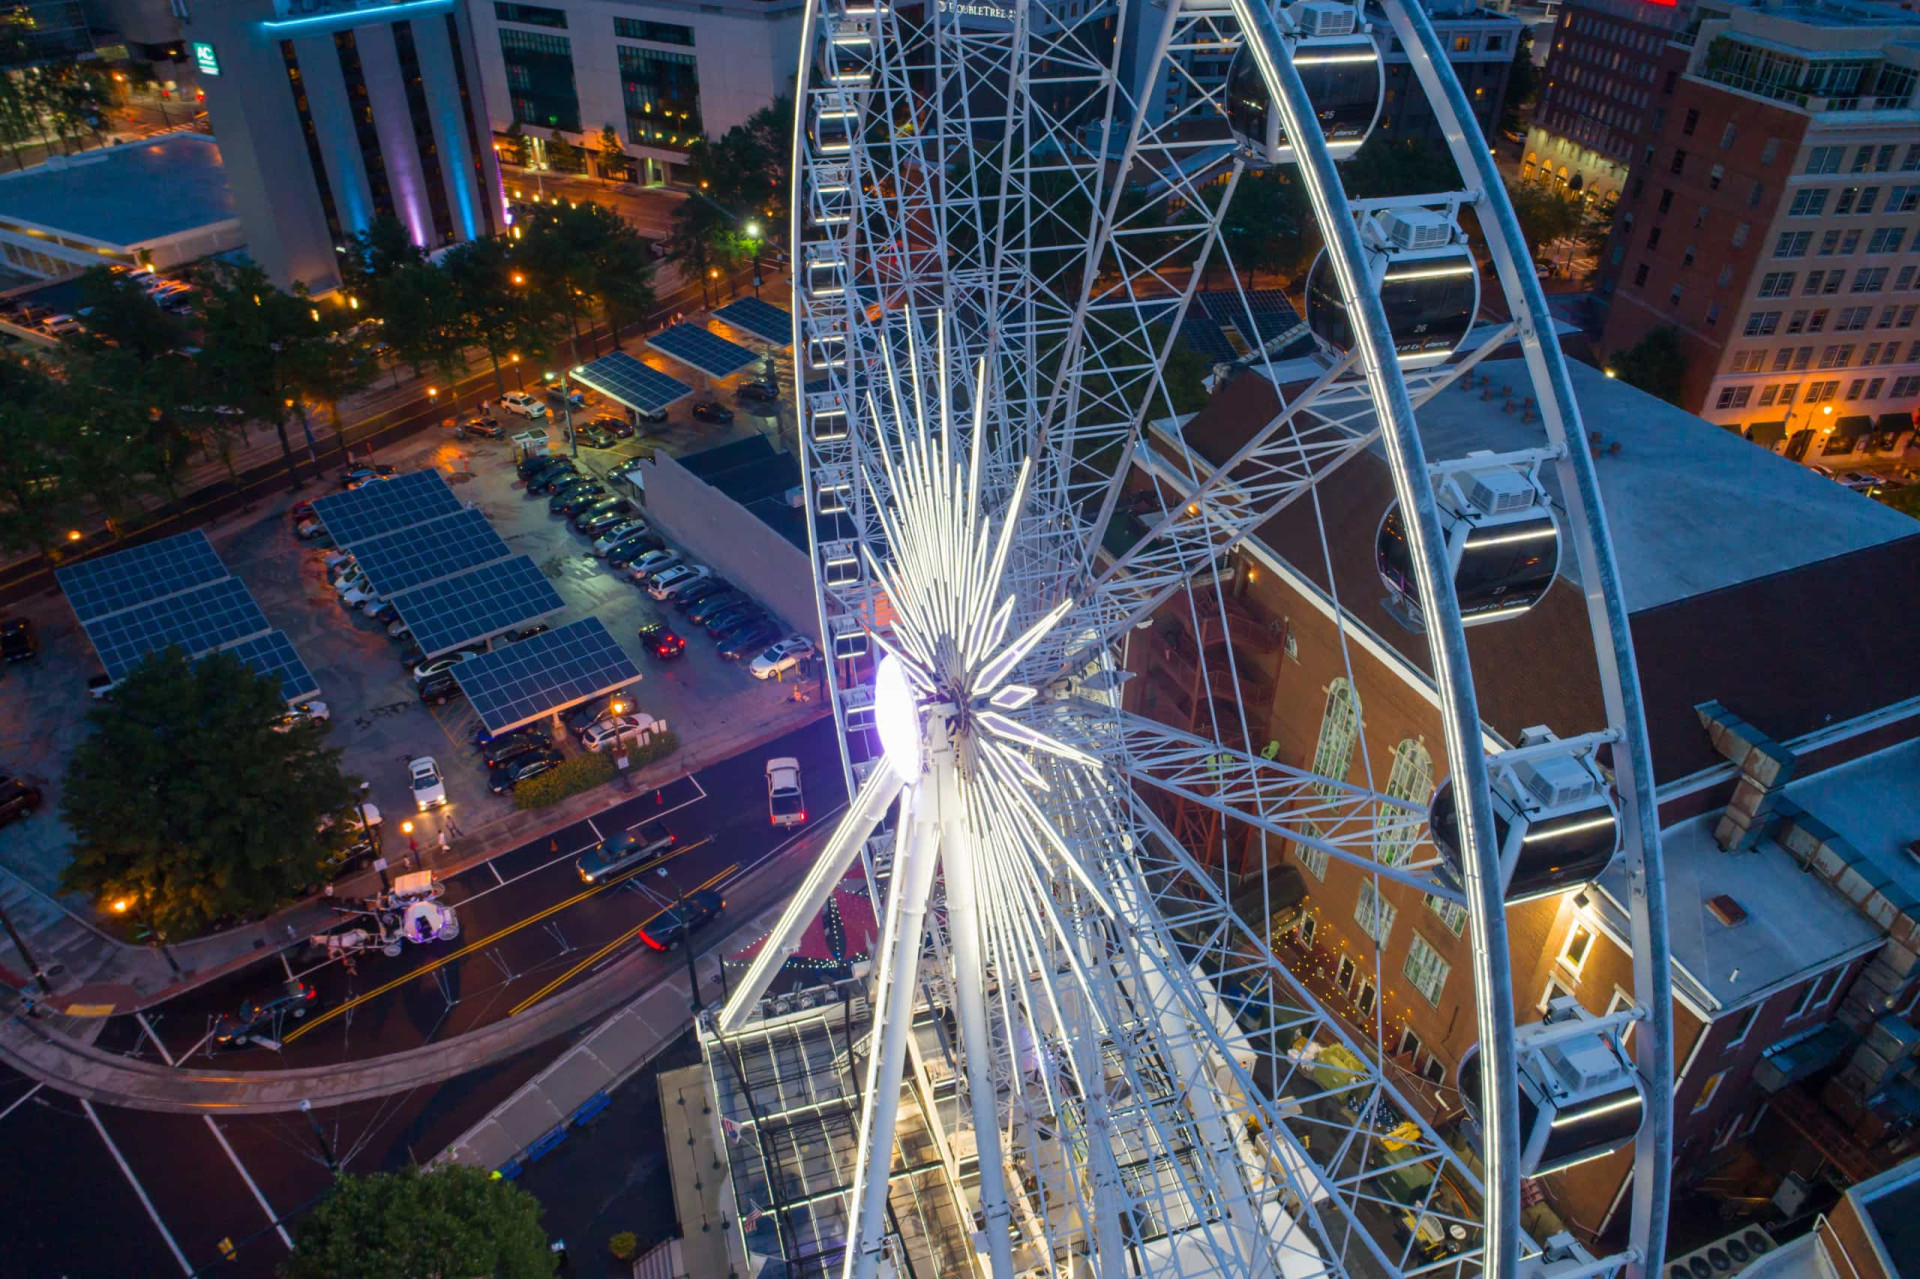 <p>If you've just touched down in Atlanta, a ride on the towering SkyView Ferris wheel is a fun way to get the lay of the land. Rising 200 ft (60 m) above Centennial Park in the heart of the state capital, the wheel's climate-controlled gondolas offer terrific panoramic views over downtown.</p><p><a href="https://www.msn.com/en-us/community/channel/vid-7xx8mnucu55yw63we9va2gwr7uihbxwc68fxqp25x6tg4ftibpra?cvid=94631541bc0f4f89bfd59158d696ad7e">Follow us and access great exclusive content every day</a></p>